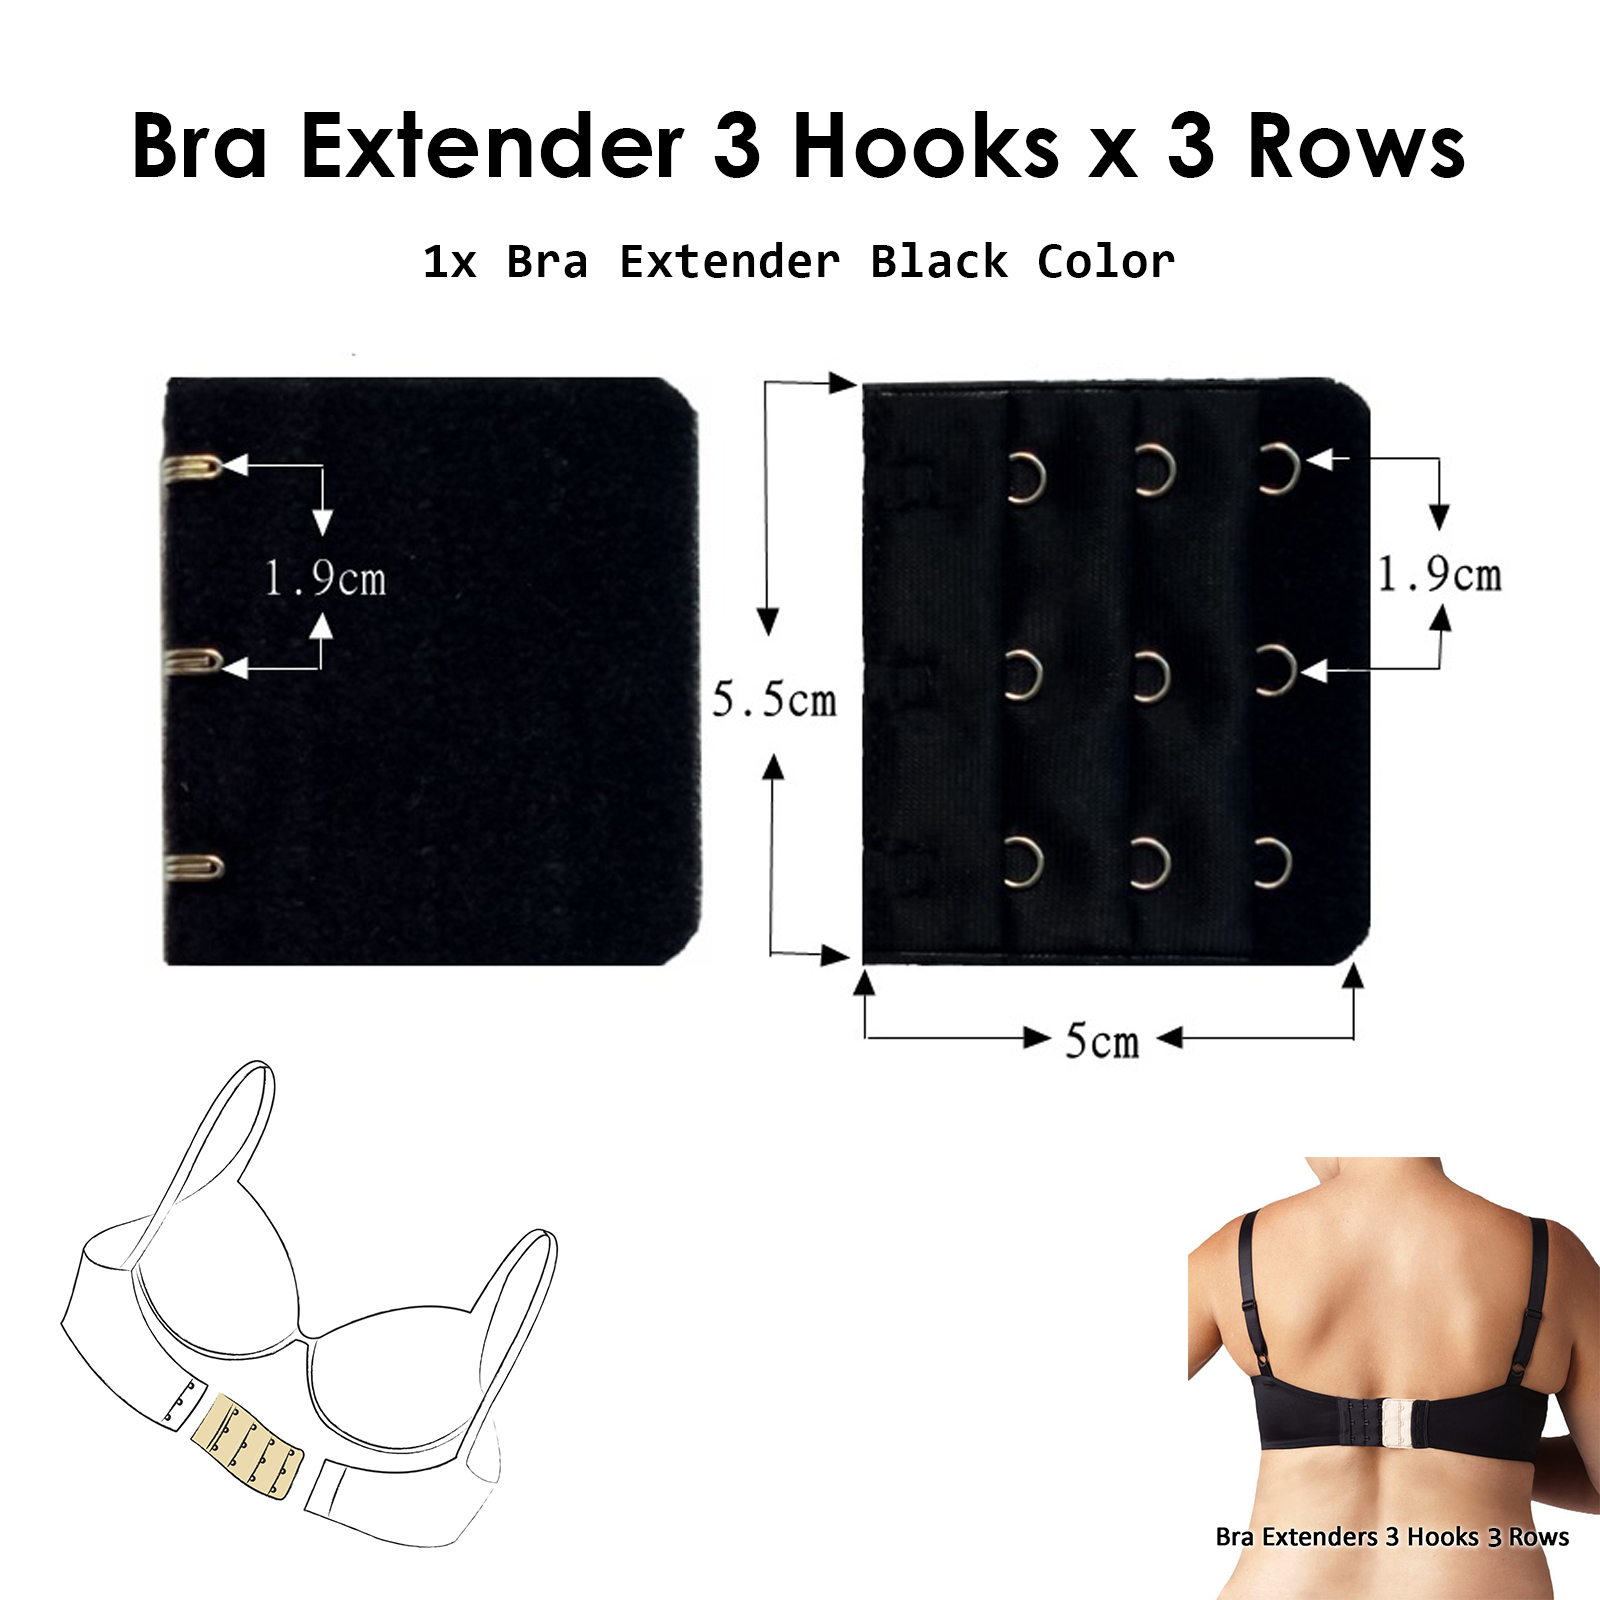 Top Quality Bra Strap Extender Hooks Increase 0.5 to 2 inches to Band Size  of your Brassiere Bra Extension 3-Hooks and 3-Rows in Black and Skin Color